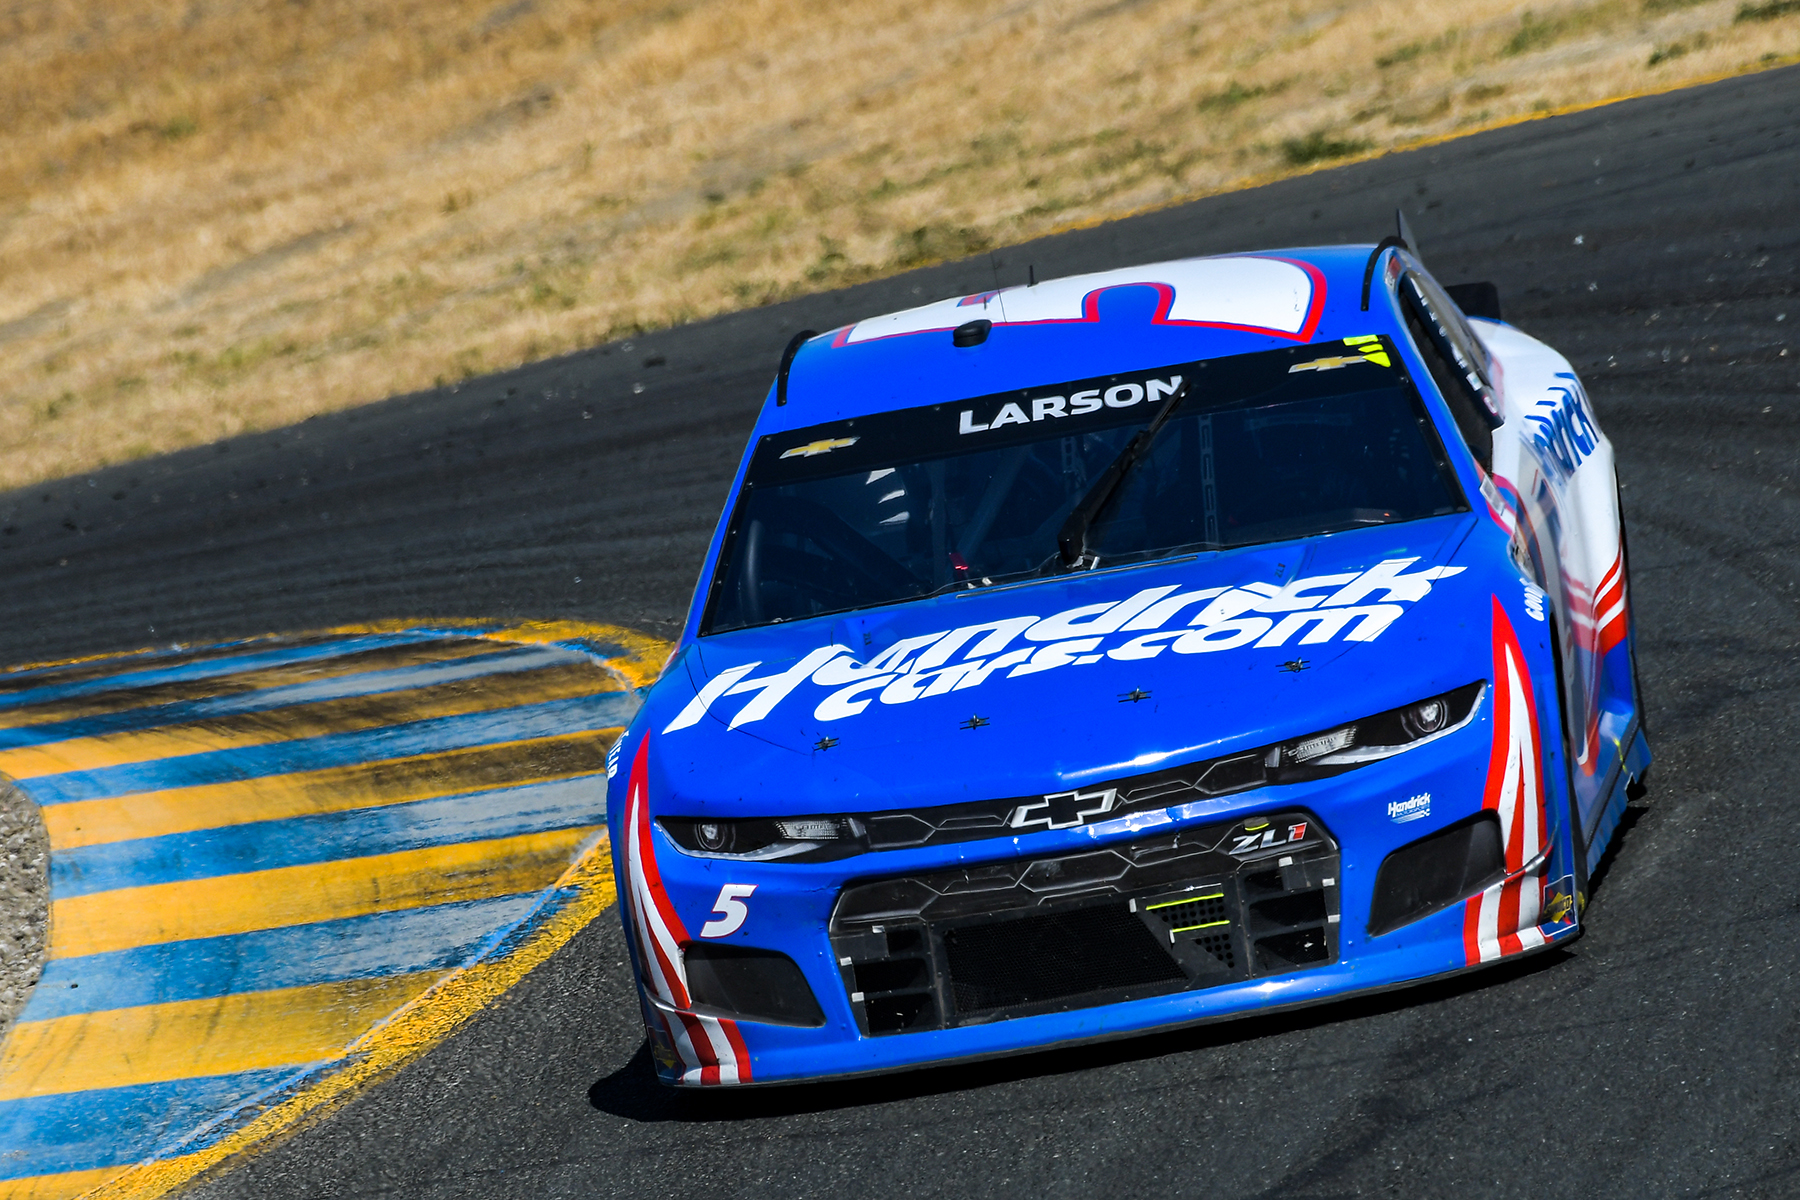 Kyle Larson Races to Dominating Victory at Toyota/Save Mart 350 Sunday at Sonoma Raceway